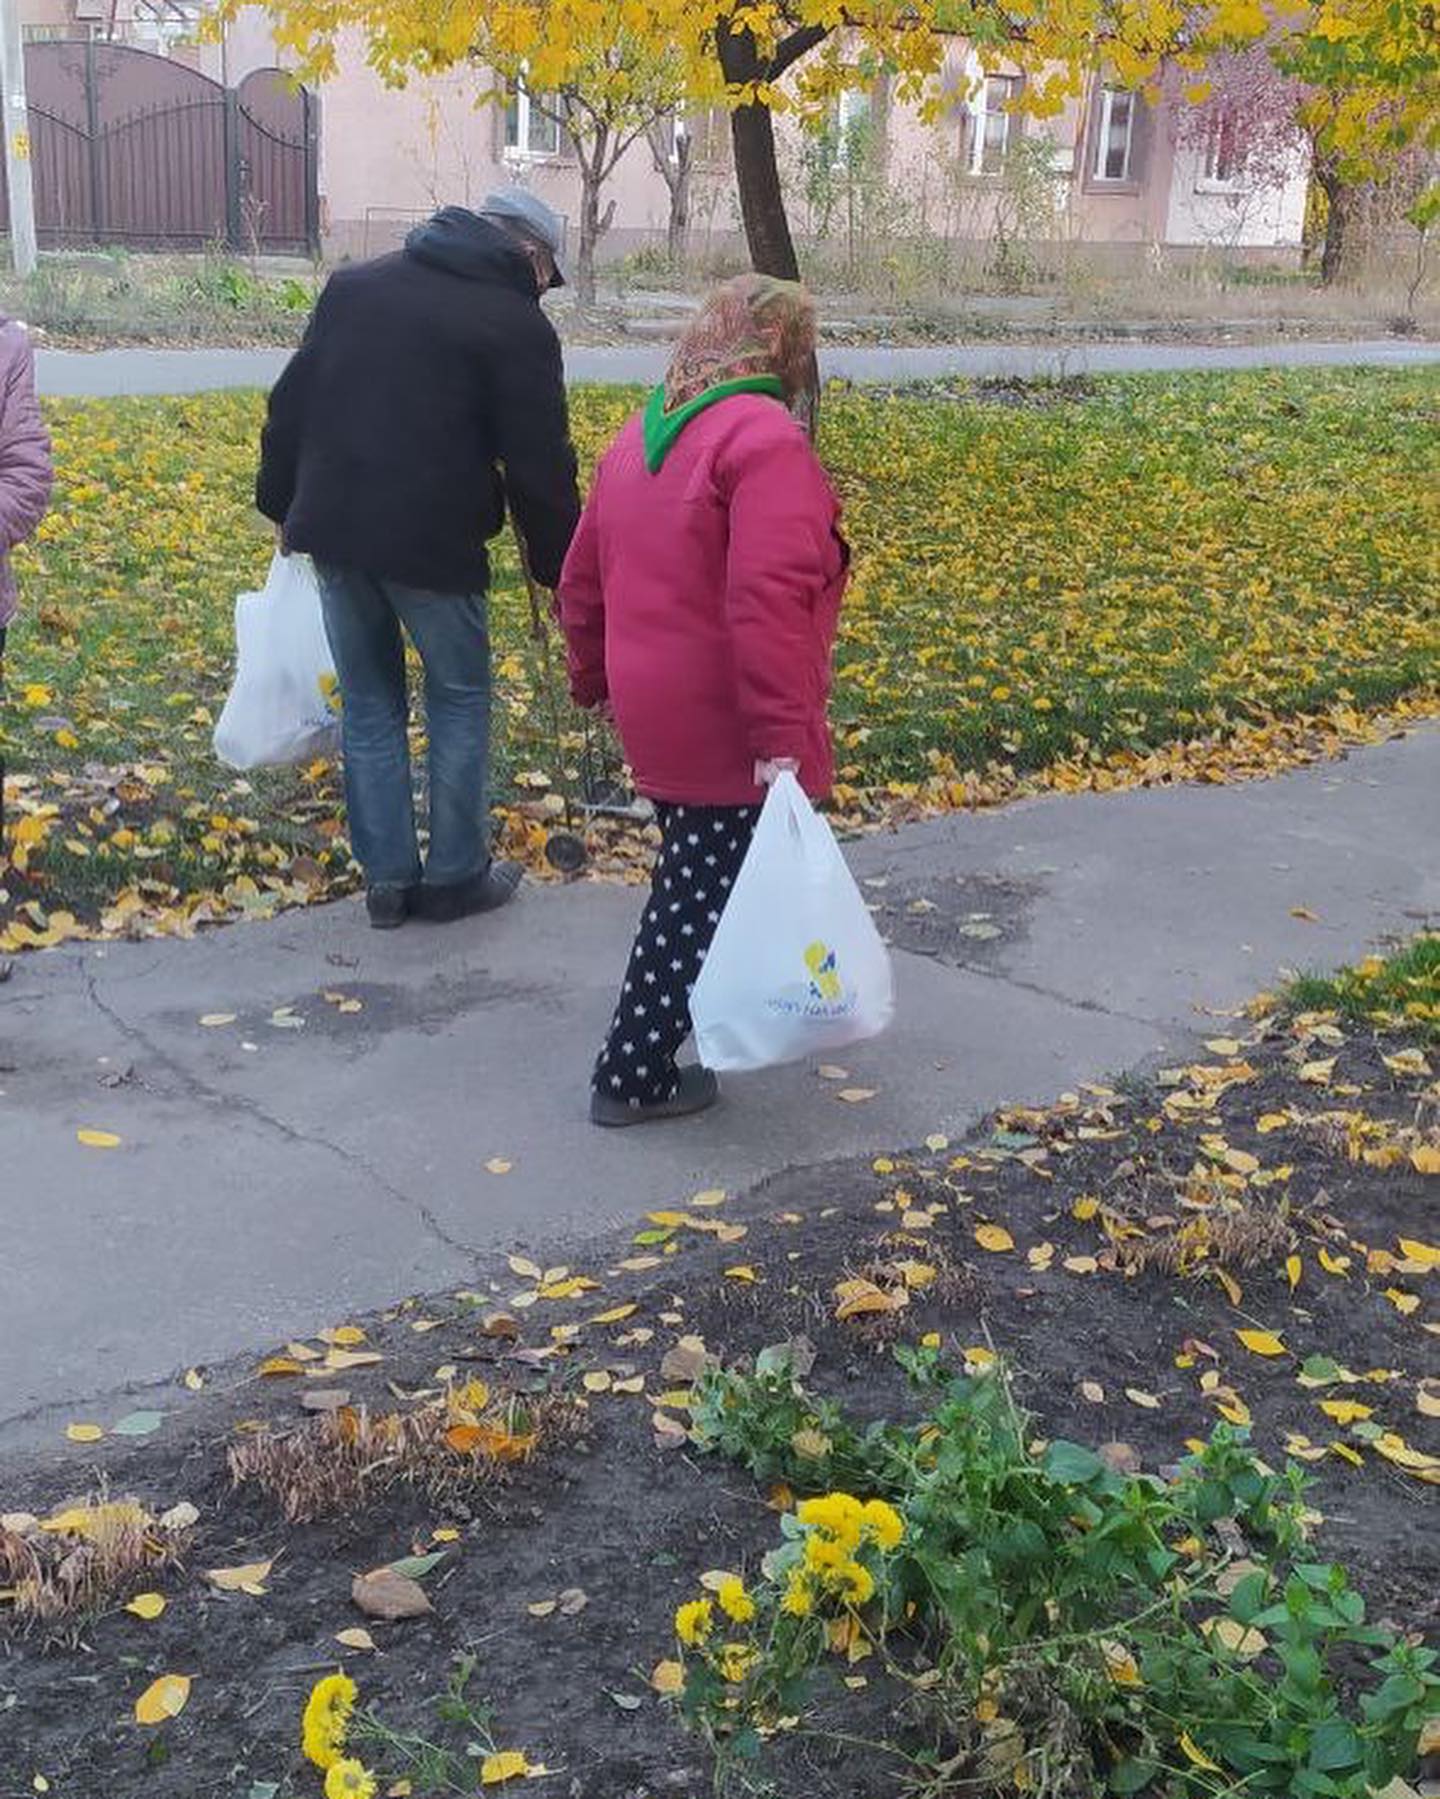 A group of people walking down a sidewalk with bags in their hands.